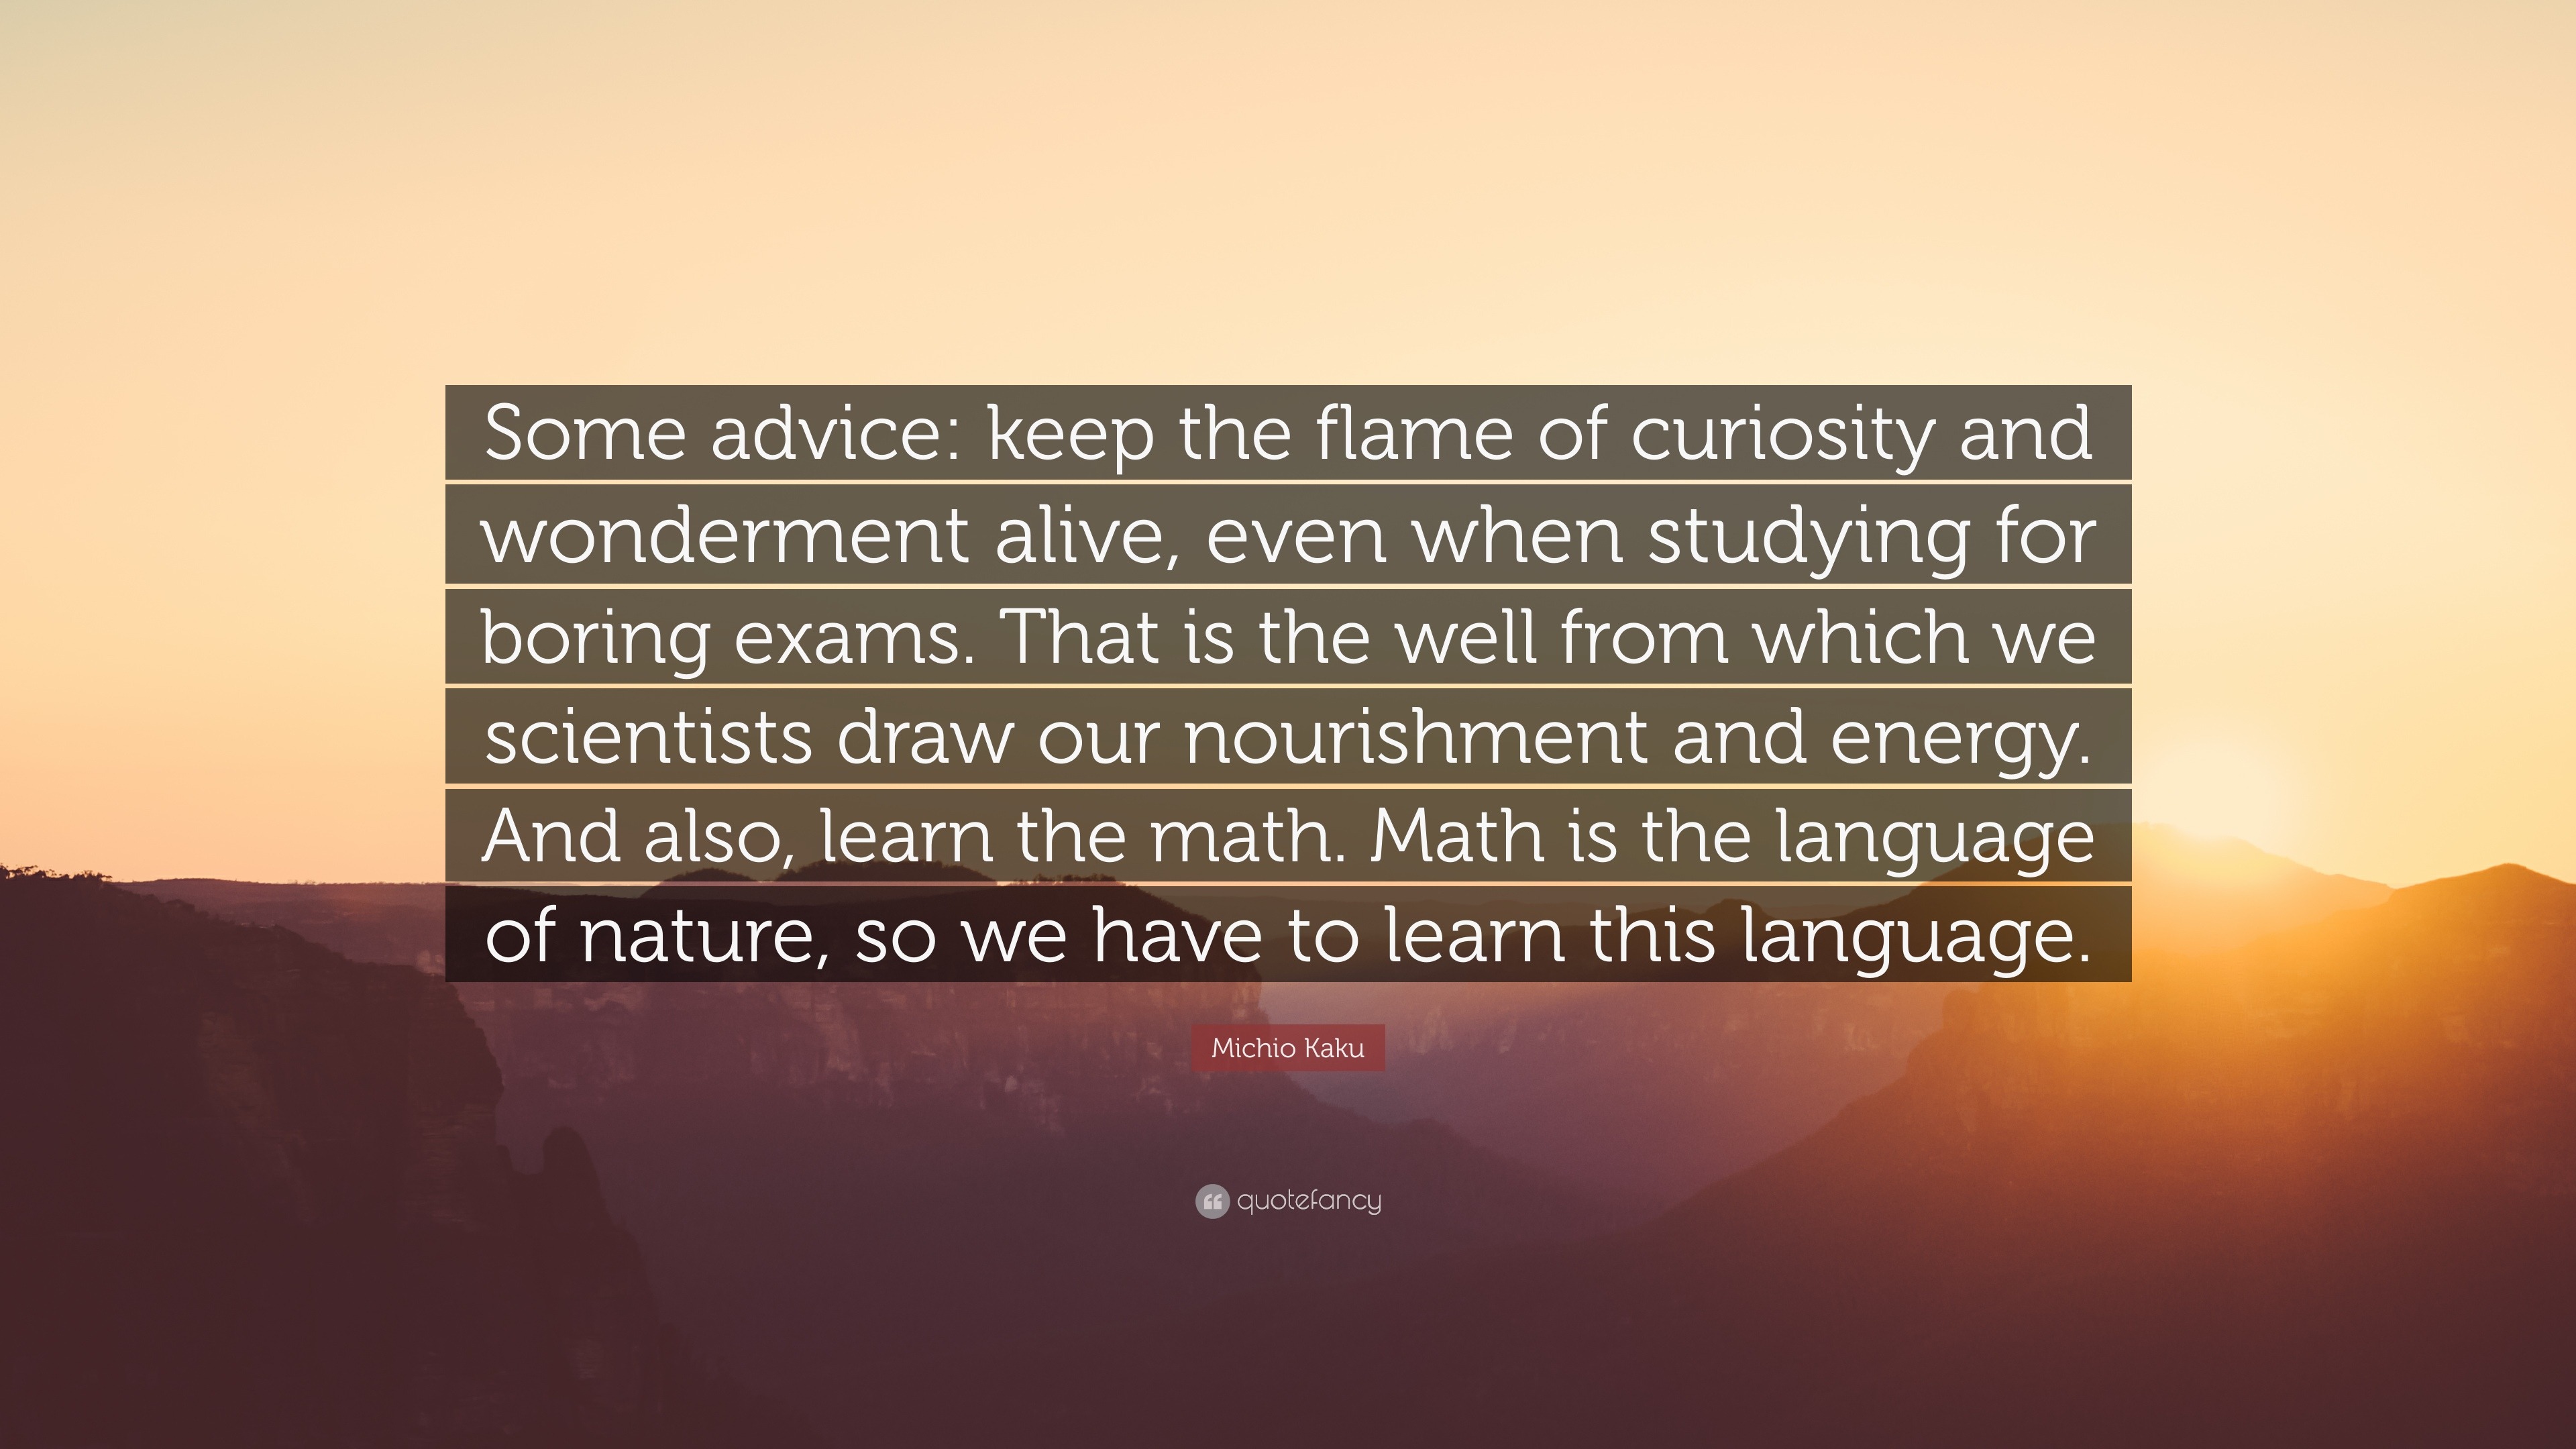 Michio Kaku Quote: “Some advice: keep the flame of curiosity and ...